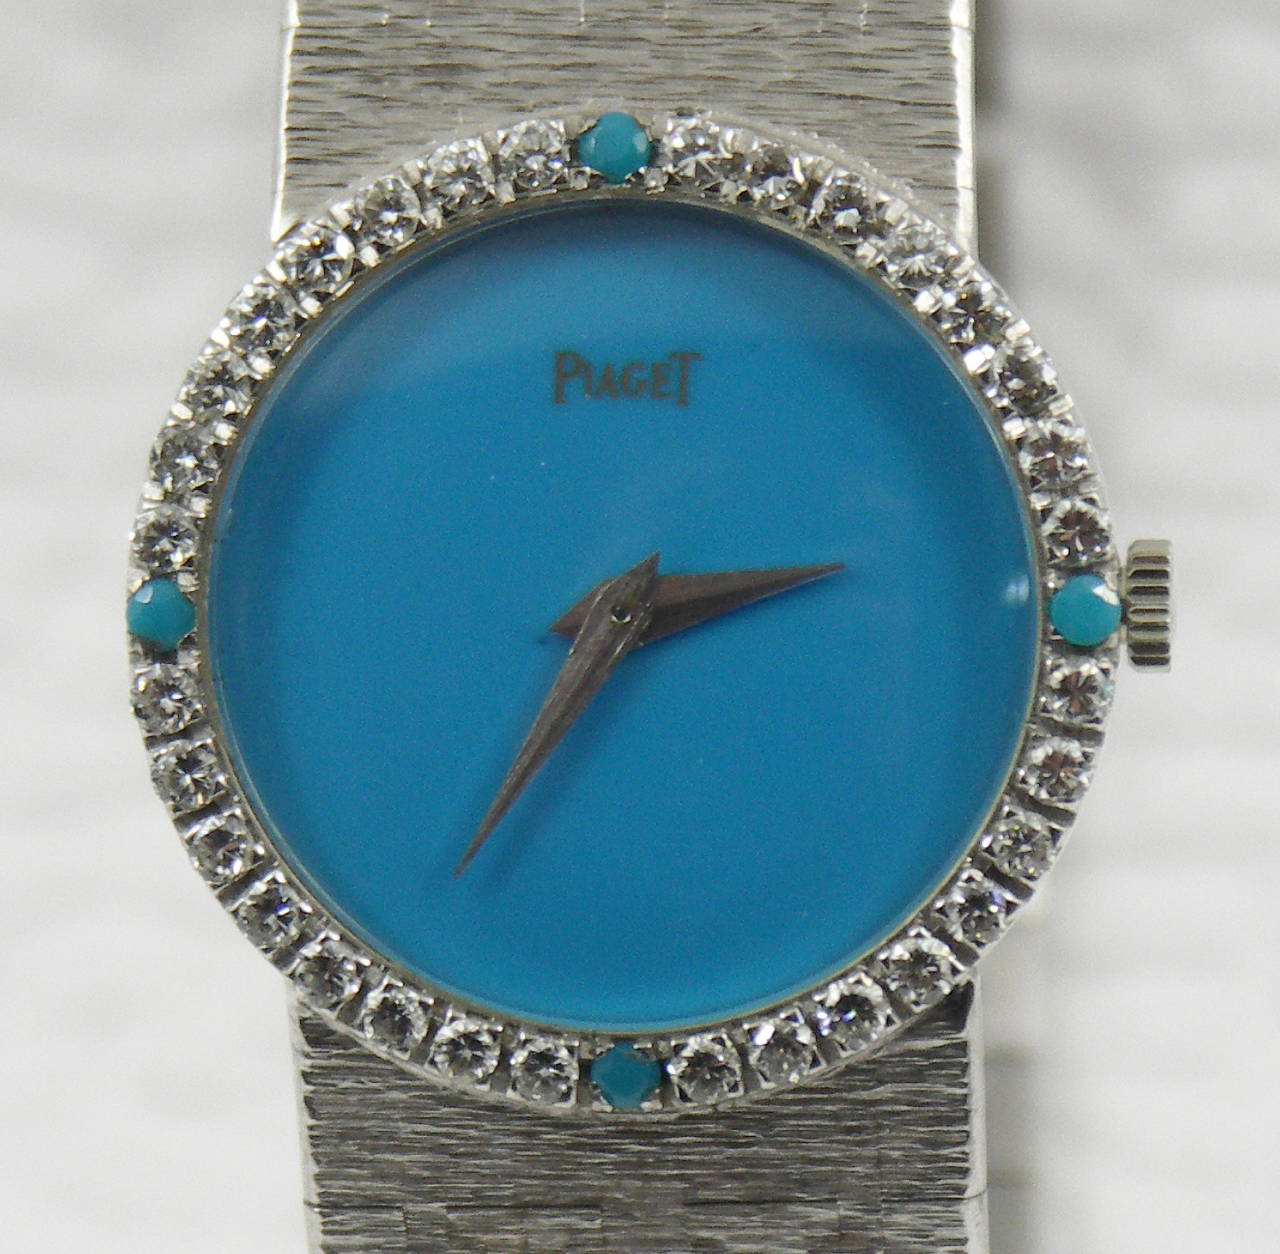 One ladies 18K white gold Piaget wristwatch with turquoise dial. The bezel of this fine timepiece measures 24mm in diameter, and is set with 4 cabochon turquoise and 32 round brilliant cut diamonds weighing 0.85ct total approximate weight. The blue